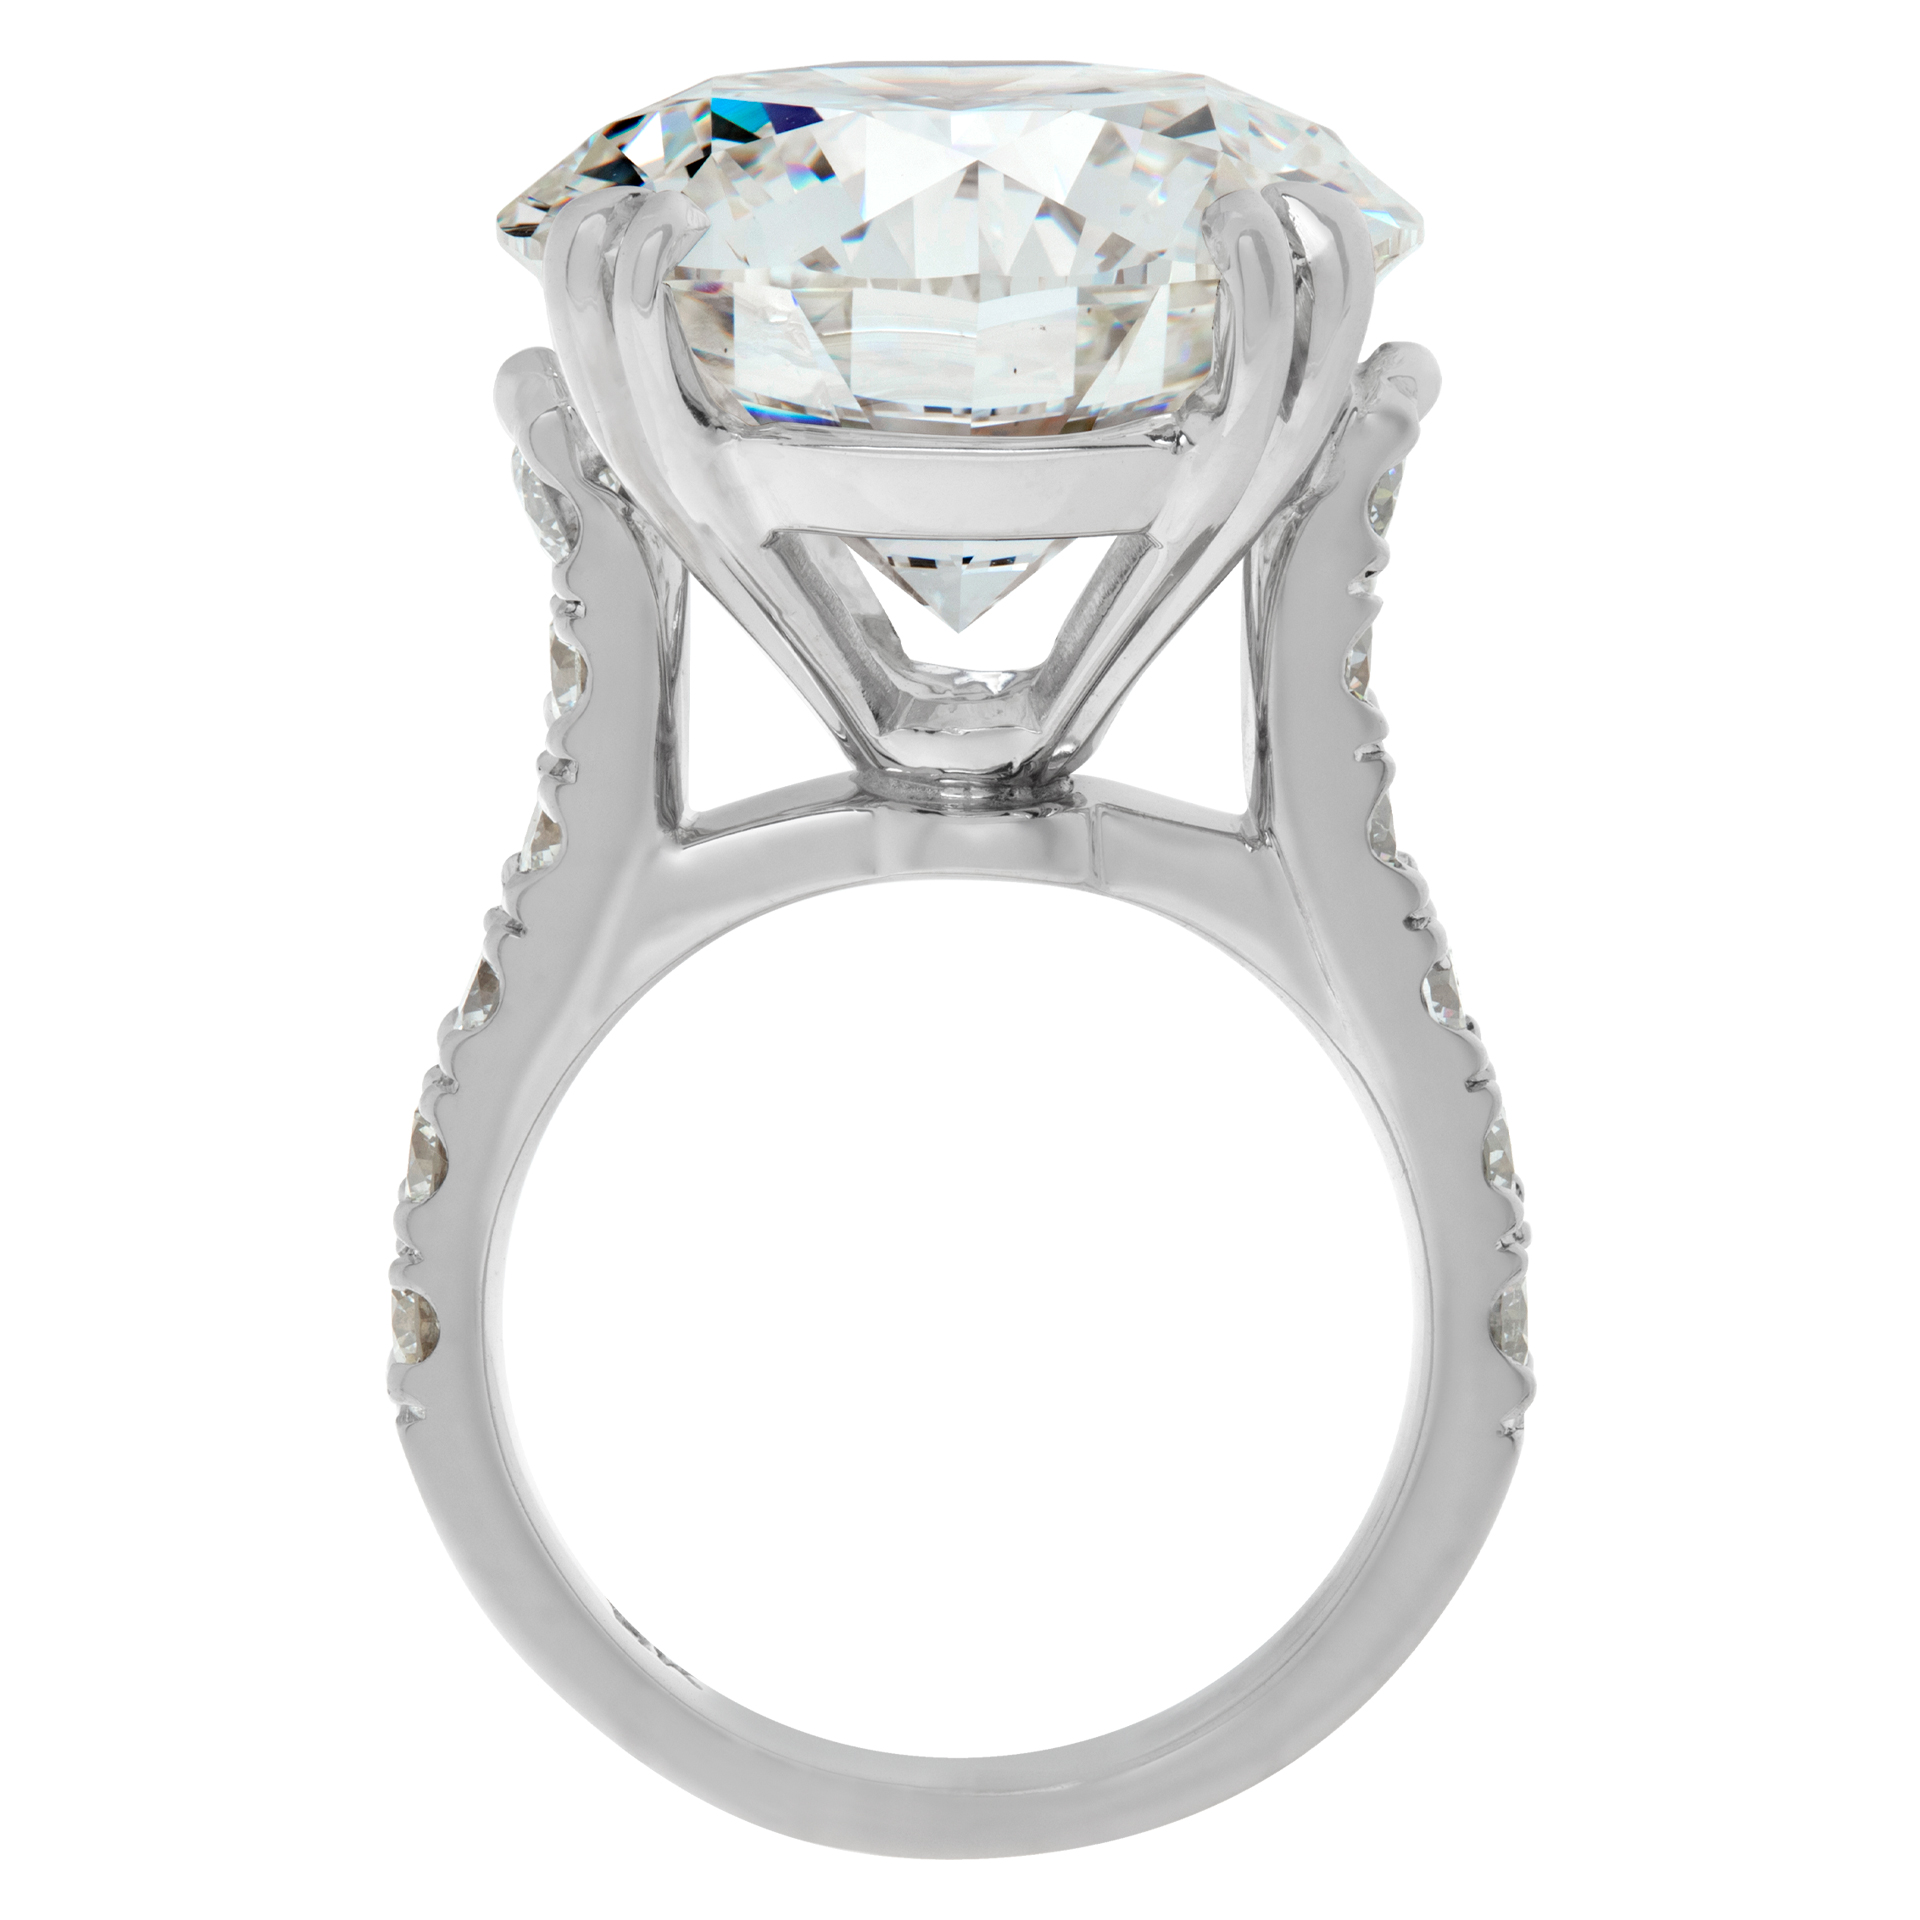 GIA Certified 16.92 carats round brilliant cut diamond set in 18K diamonds white gold ring. I color, image 7